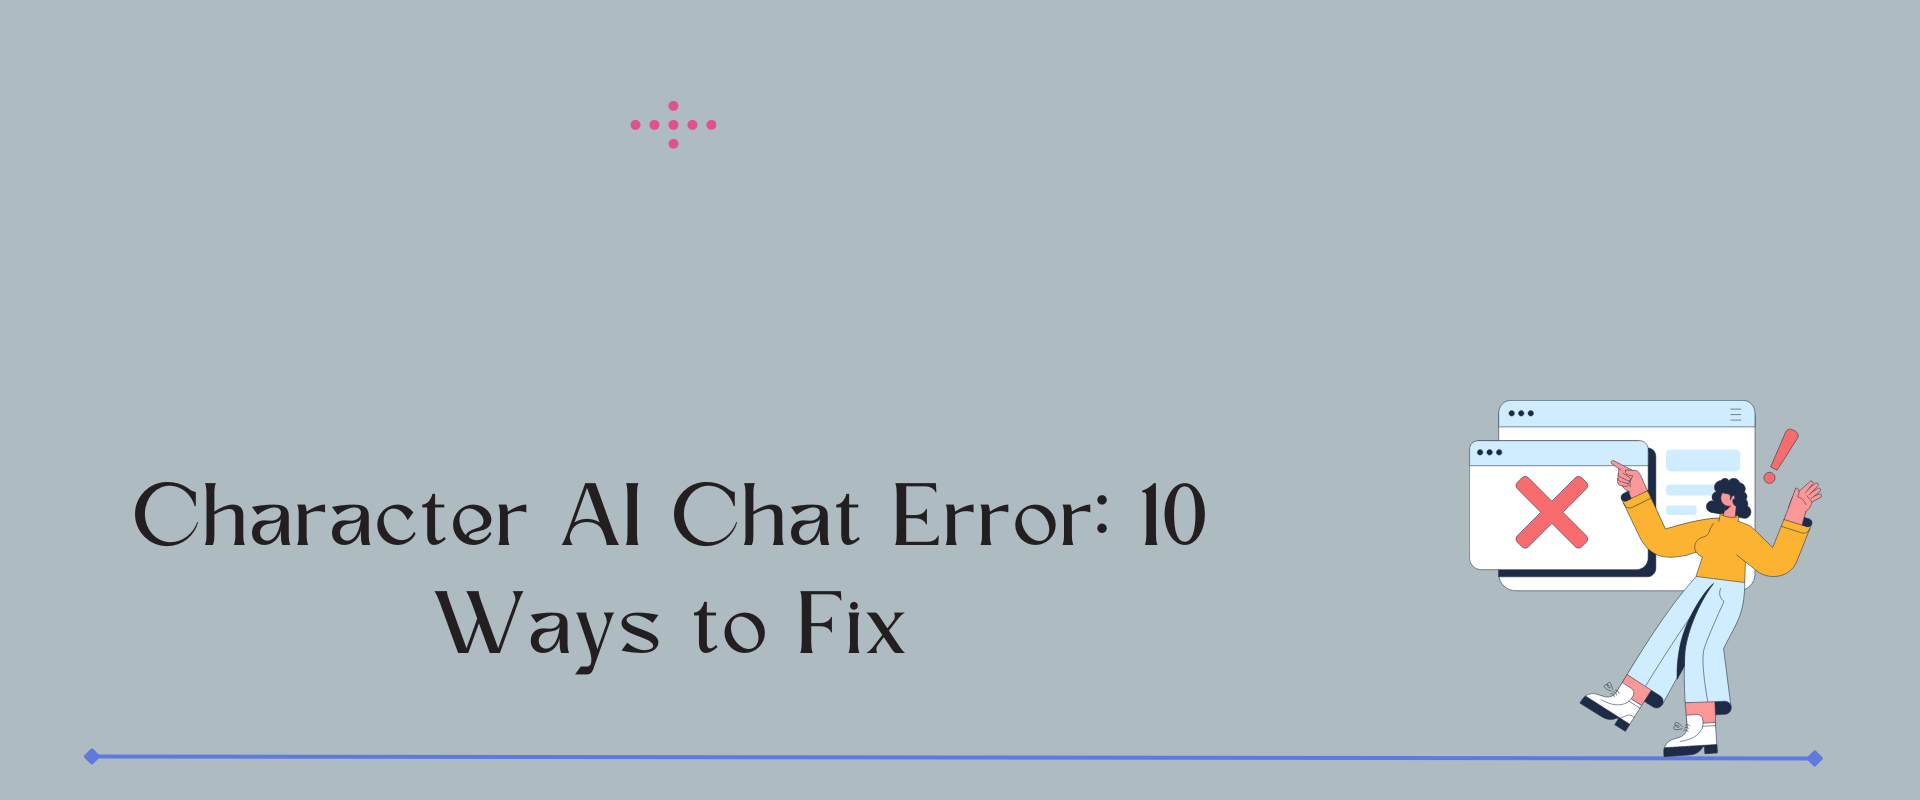 character ai chat error